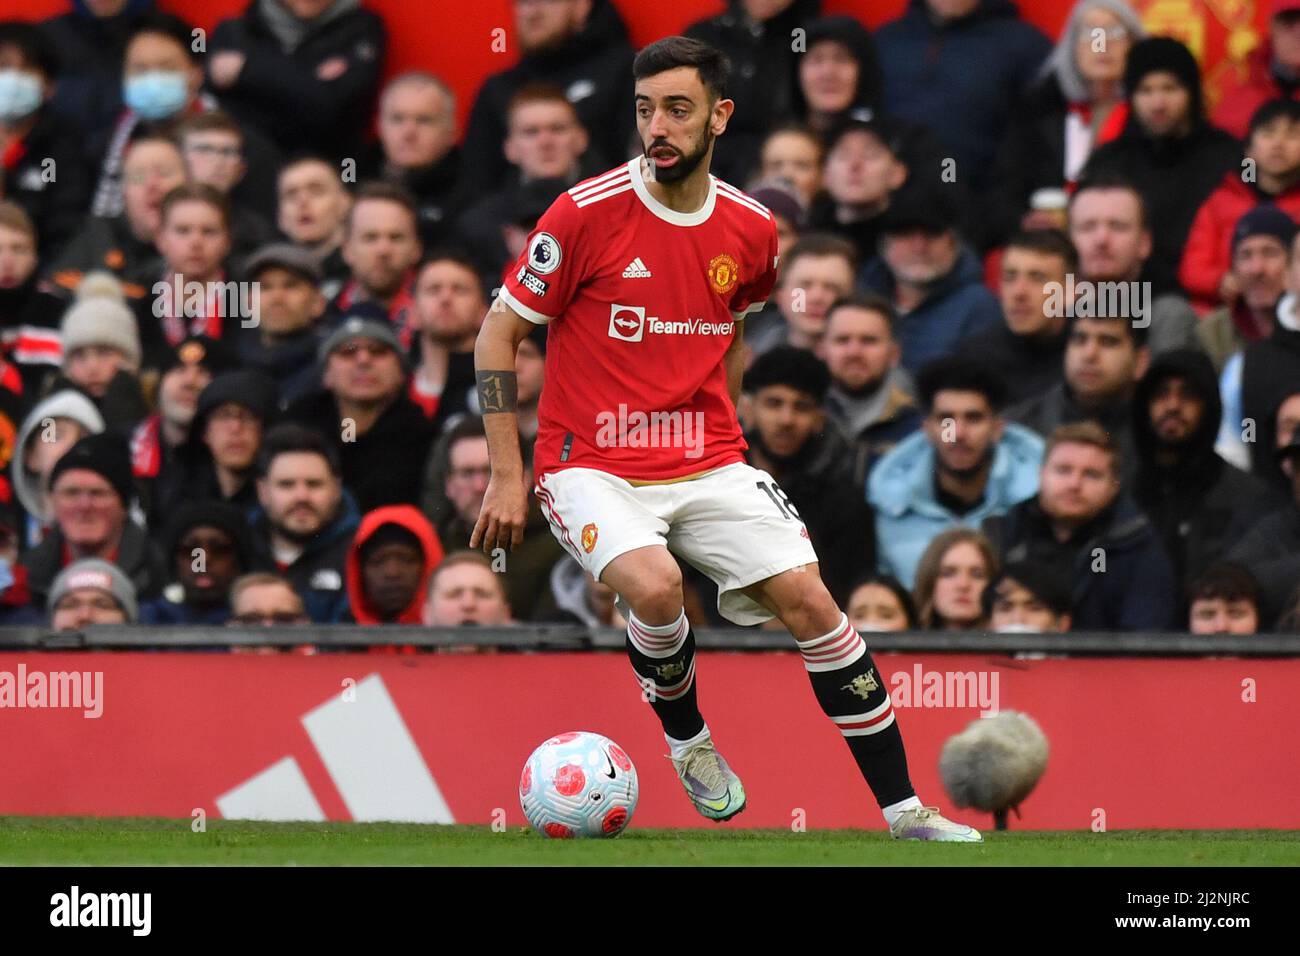 Manchester United's Bruno Fernandes during the Premier League match at Old Trafford, Greater Manchester, UK. Picture date: Saturday April 2, 2022. Photo credit should read: Anthony Devlin Stock Photo